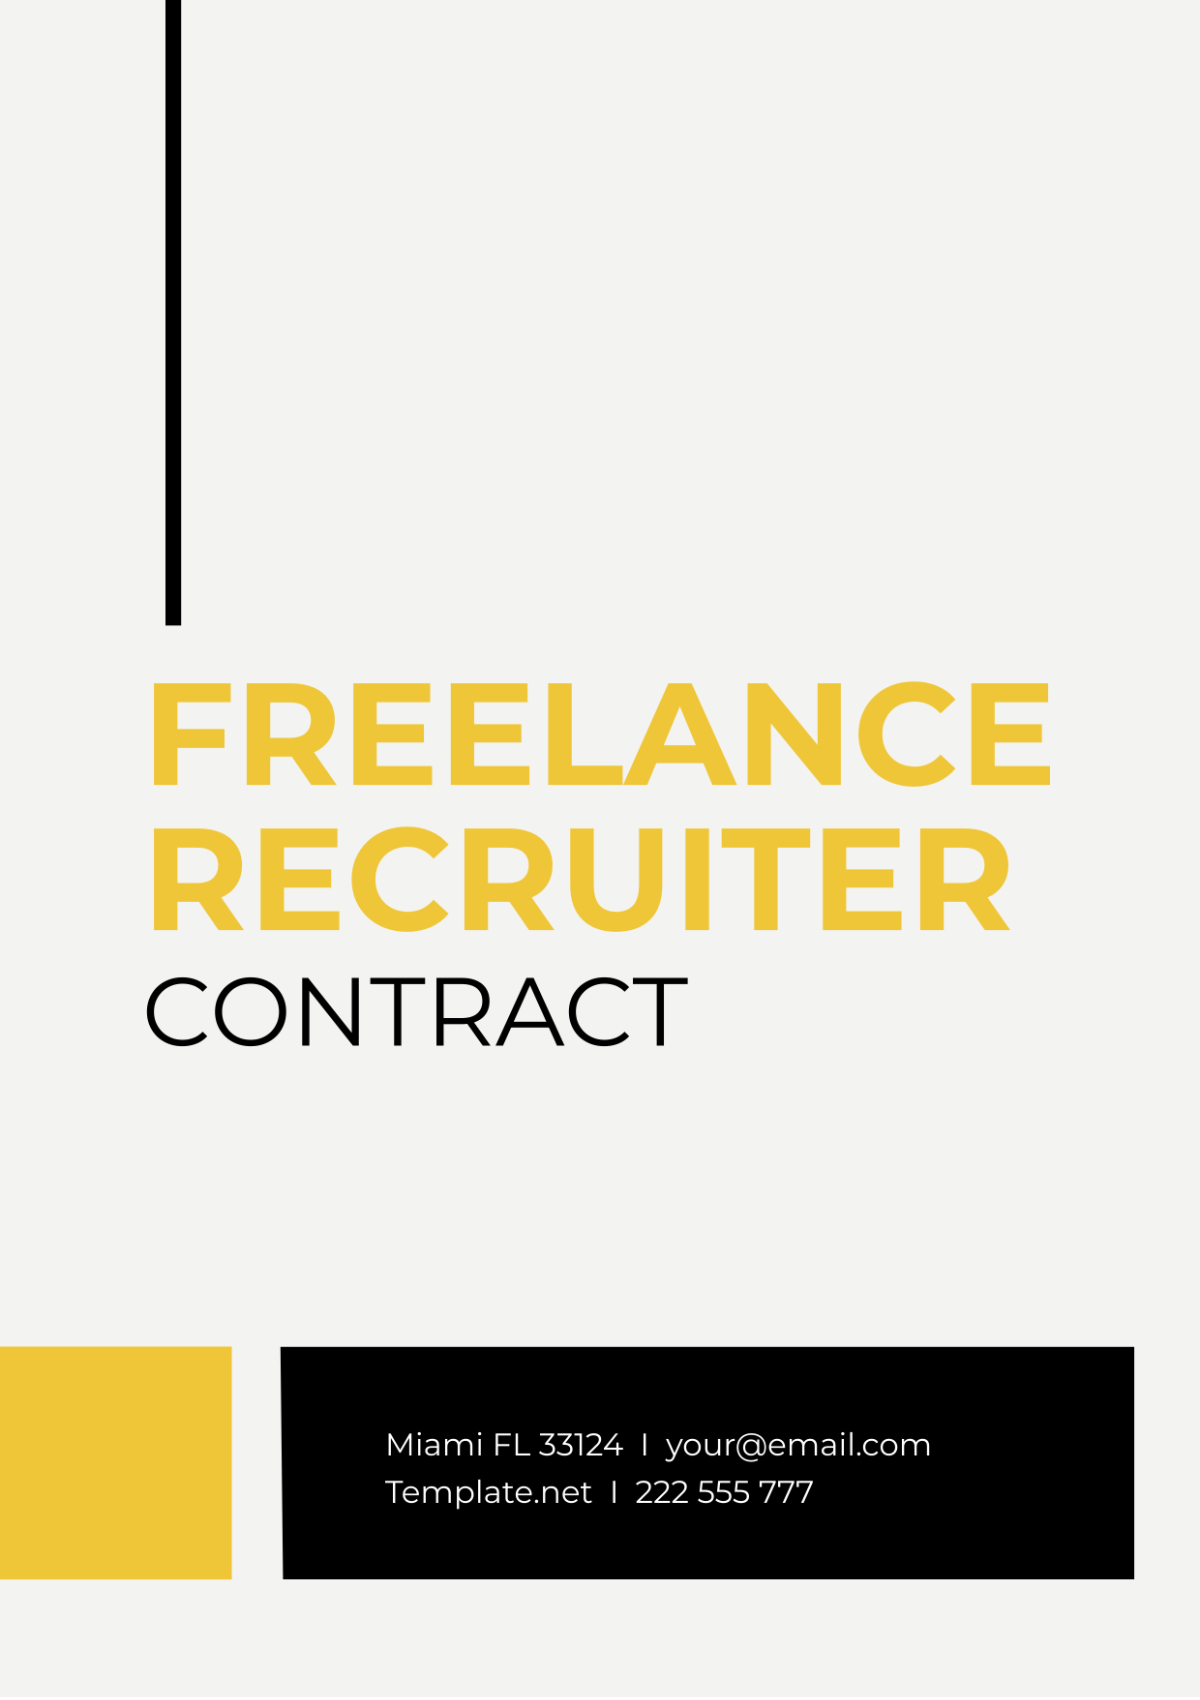 Freelance Recruiter Contract Template Edit Online Download Example